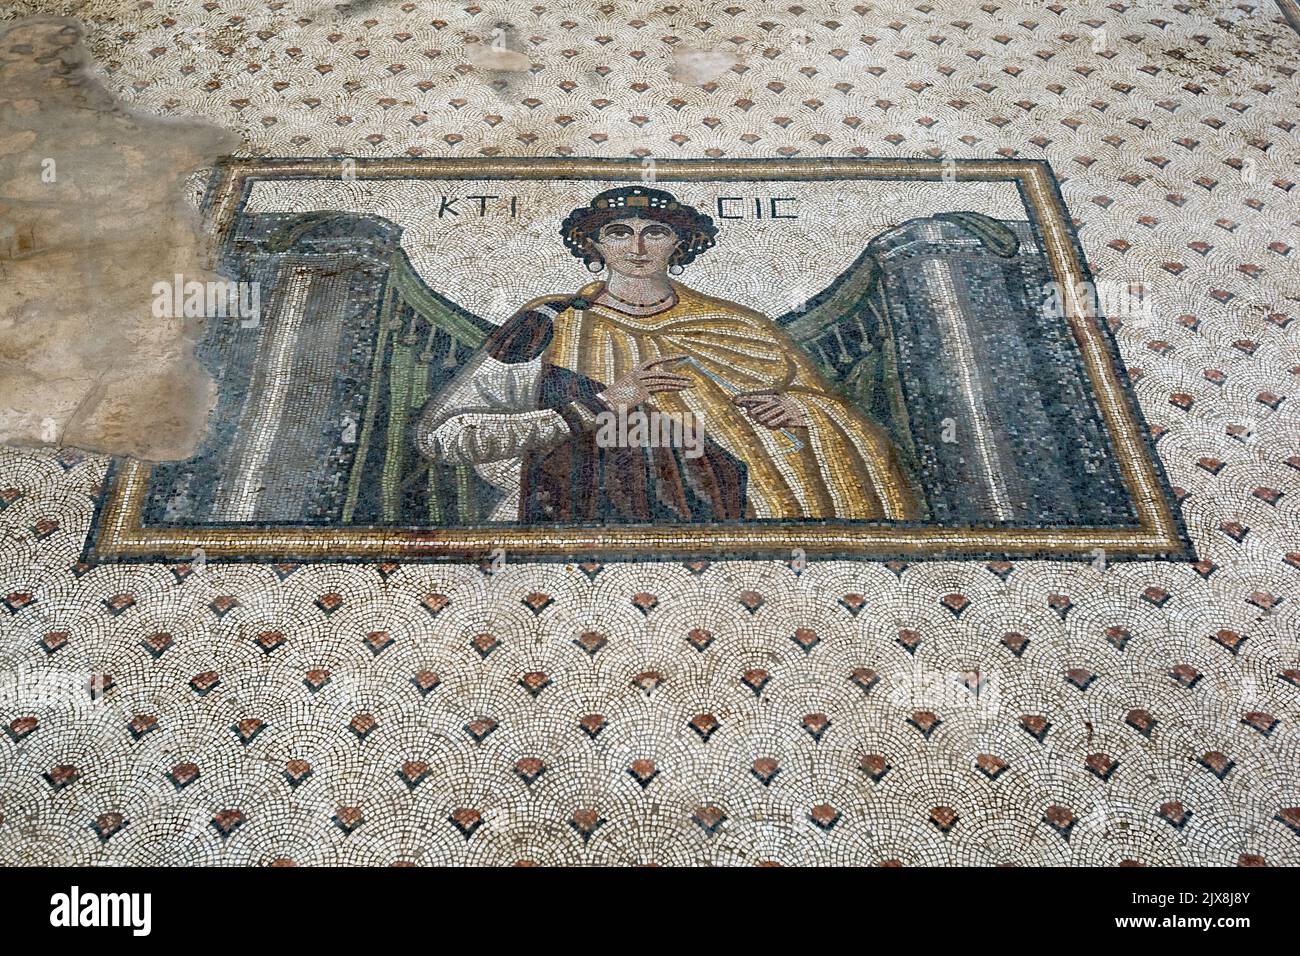 A mosaic depicting Ktisis, the figure personifying acts of generosity or foundation at the Haleplibahce Mosaic Museum at Sanliurfa in Turkey. Stock Photo